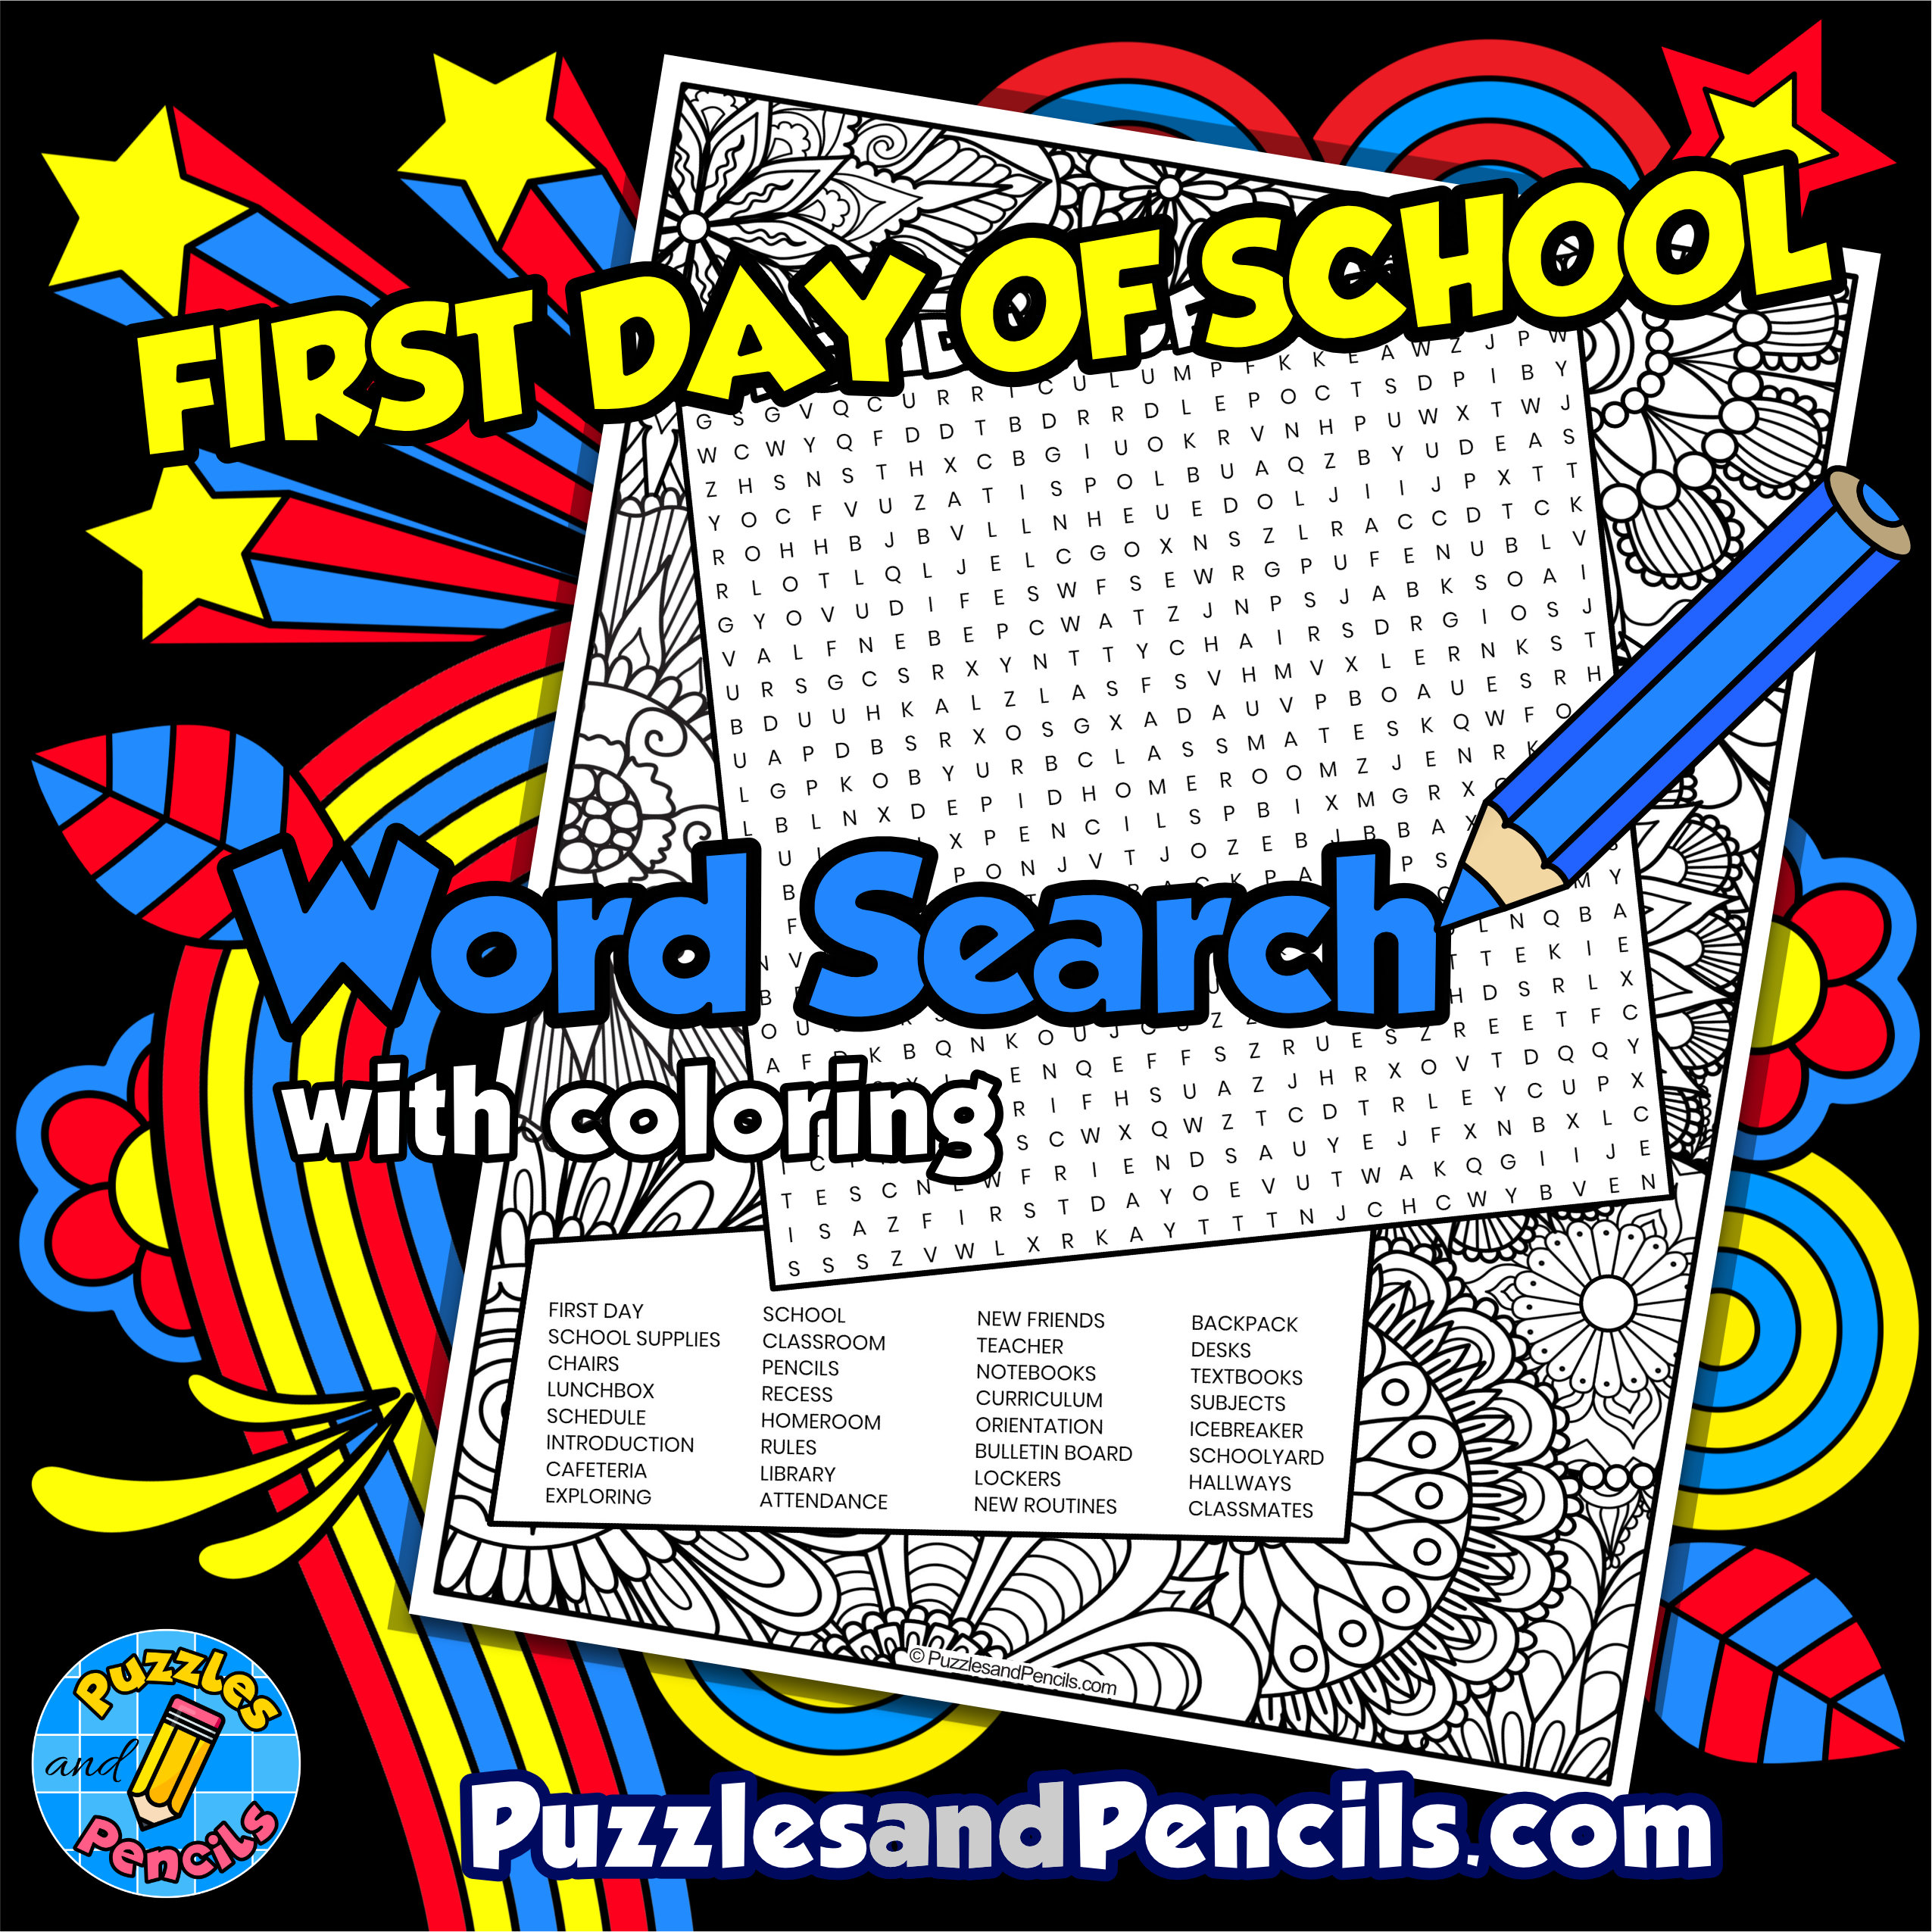 First day of school word search puzzle with coloring back to school wordsearch made by teachers